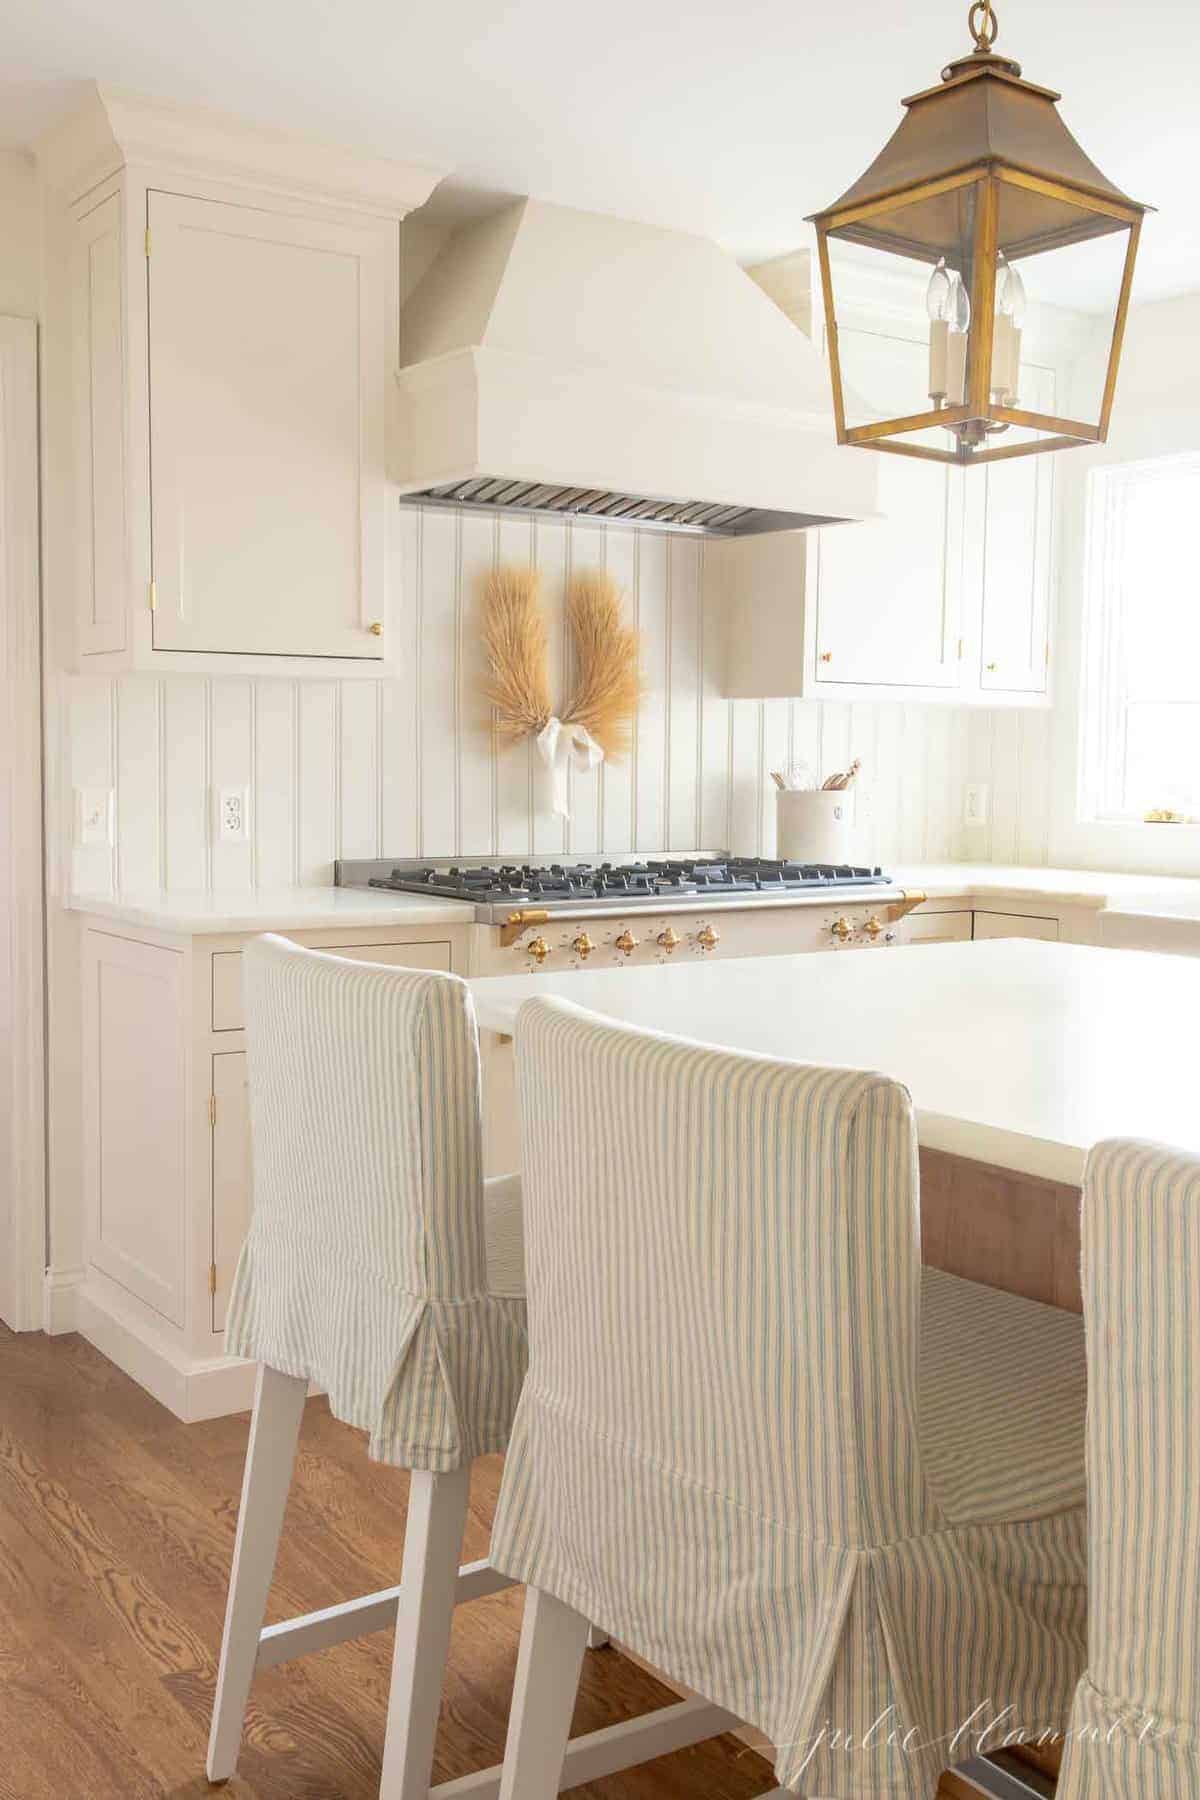 A white and wood kitchen with white beadboard.